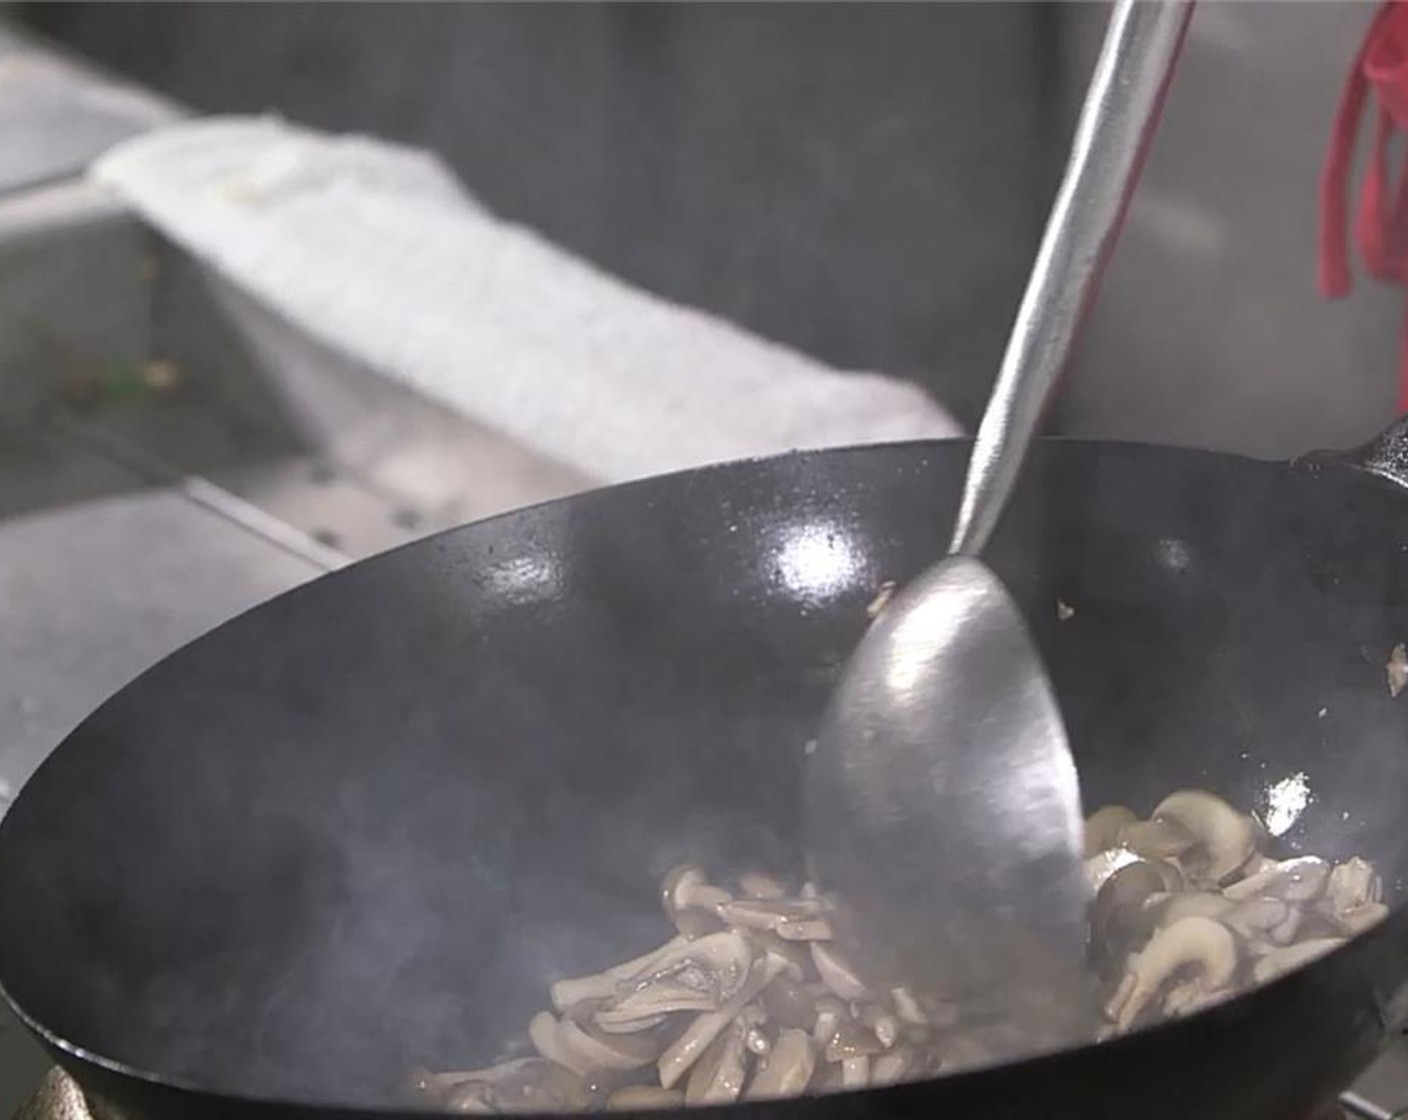 step 4 In a wok or large saute pan, heat up a generous amount of Vegetable Oil (as needed) over high heat. Add the mushrooms and stir fry for 2 minutes.